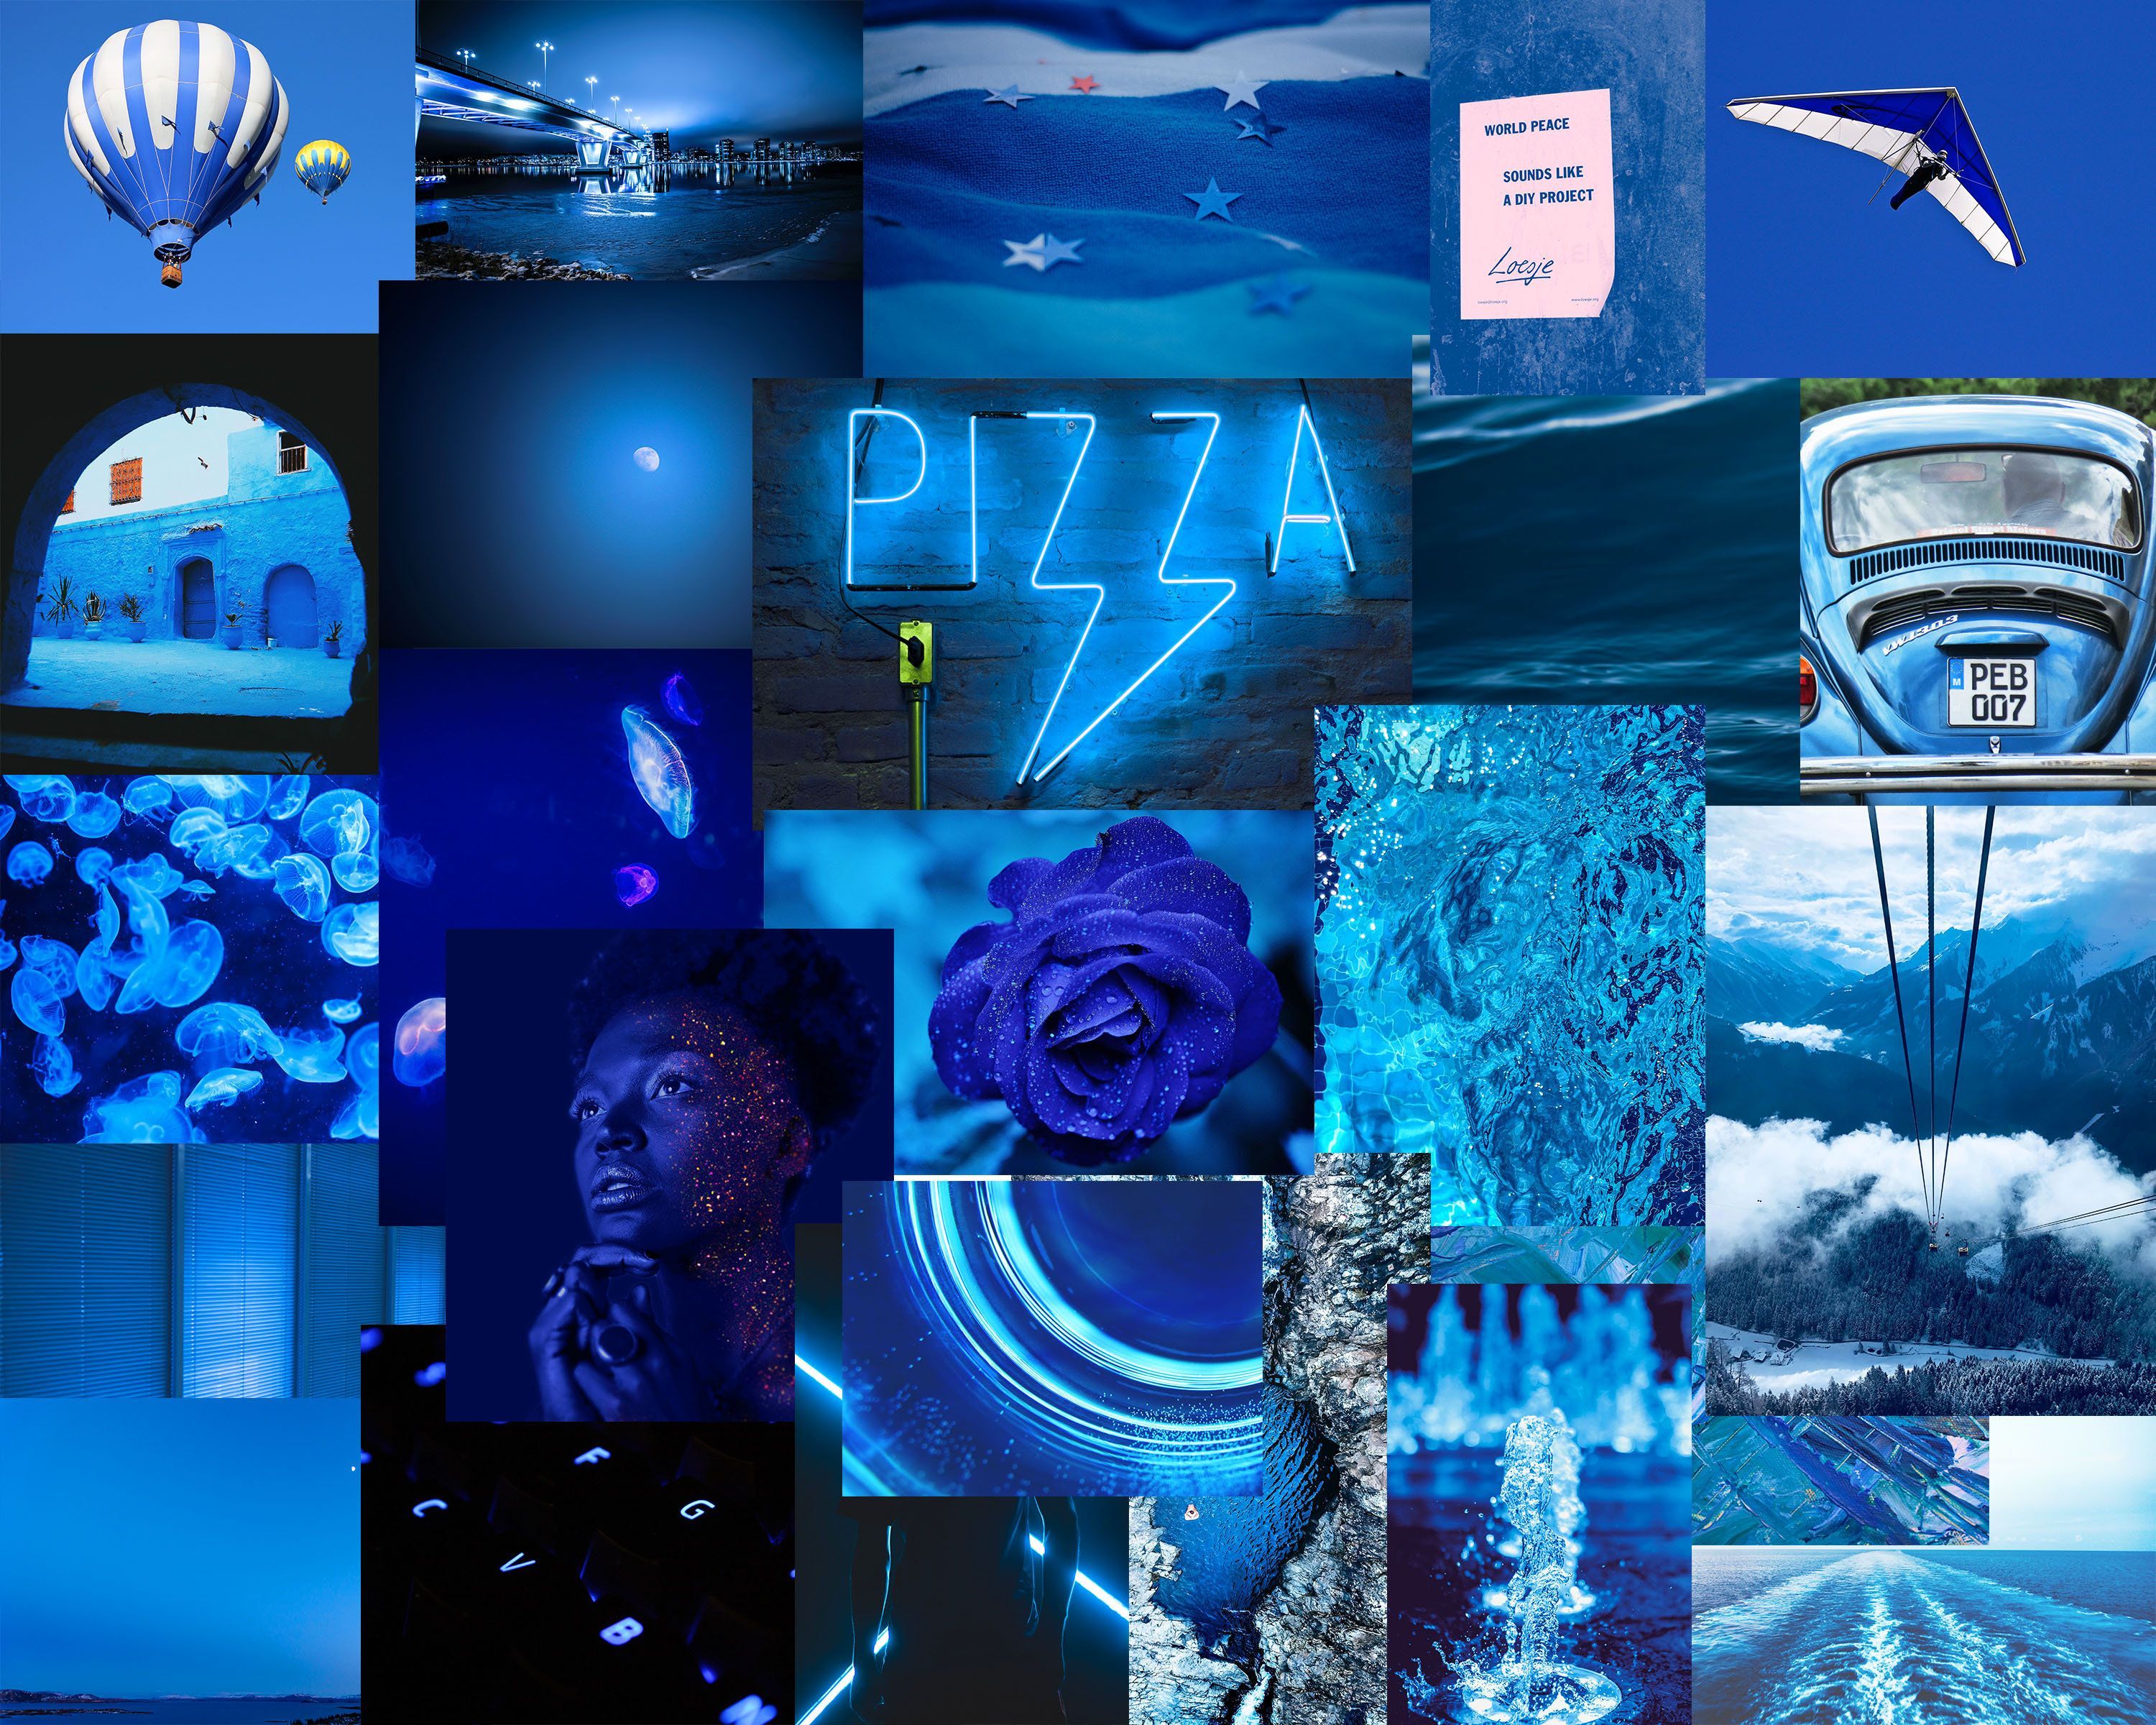 A collage of blue images including pizza, hot air balloons, and a house. - Neon blue, navy blue